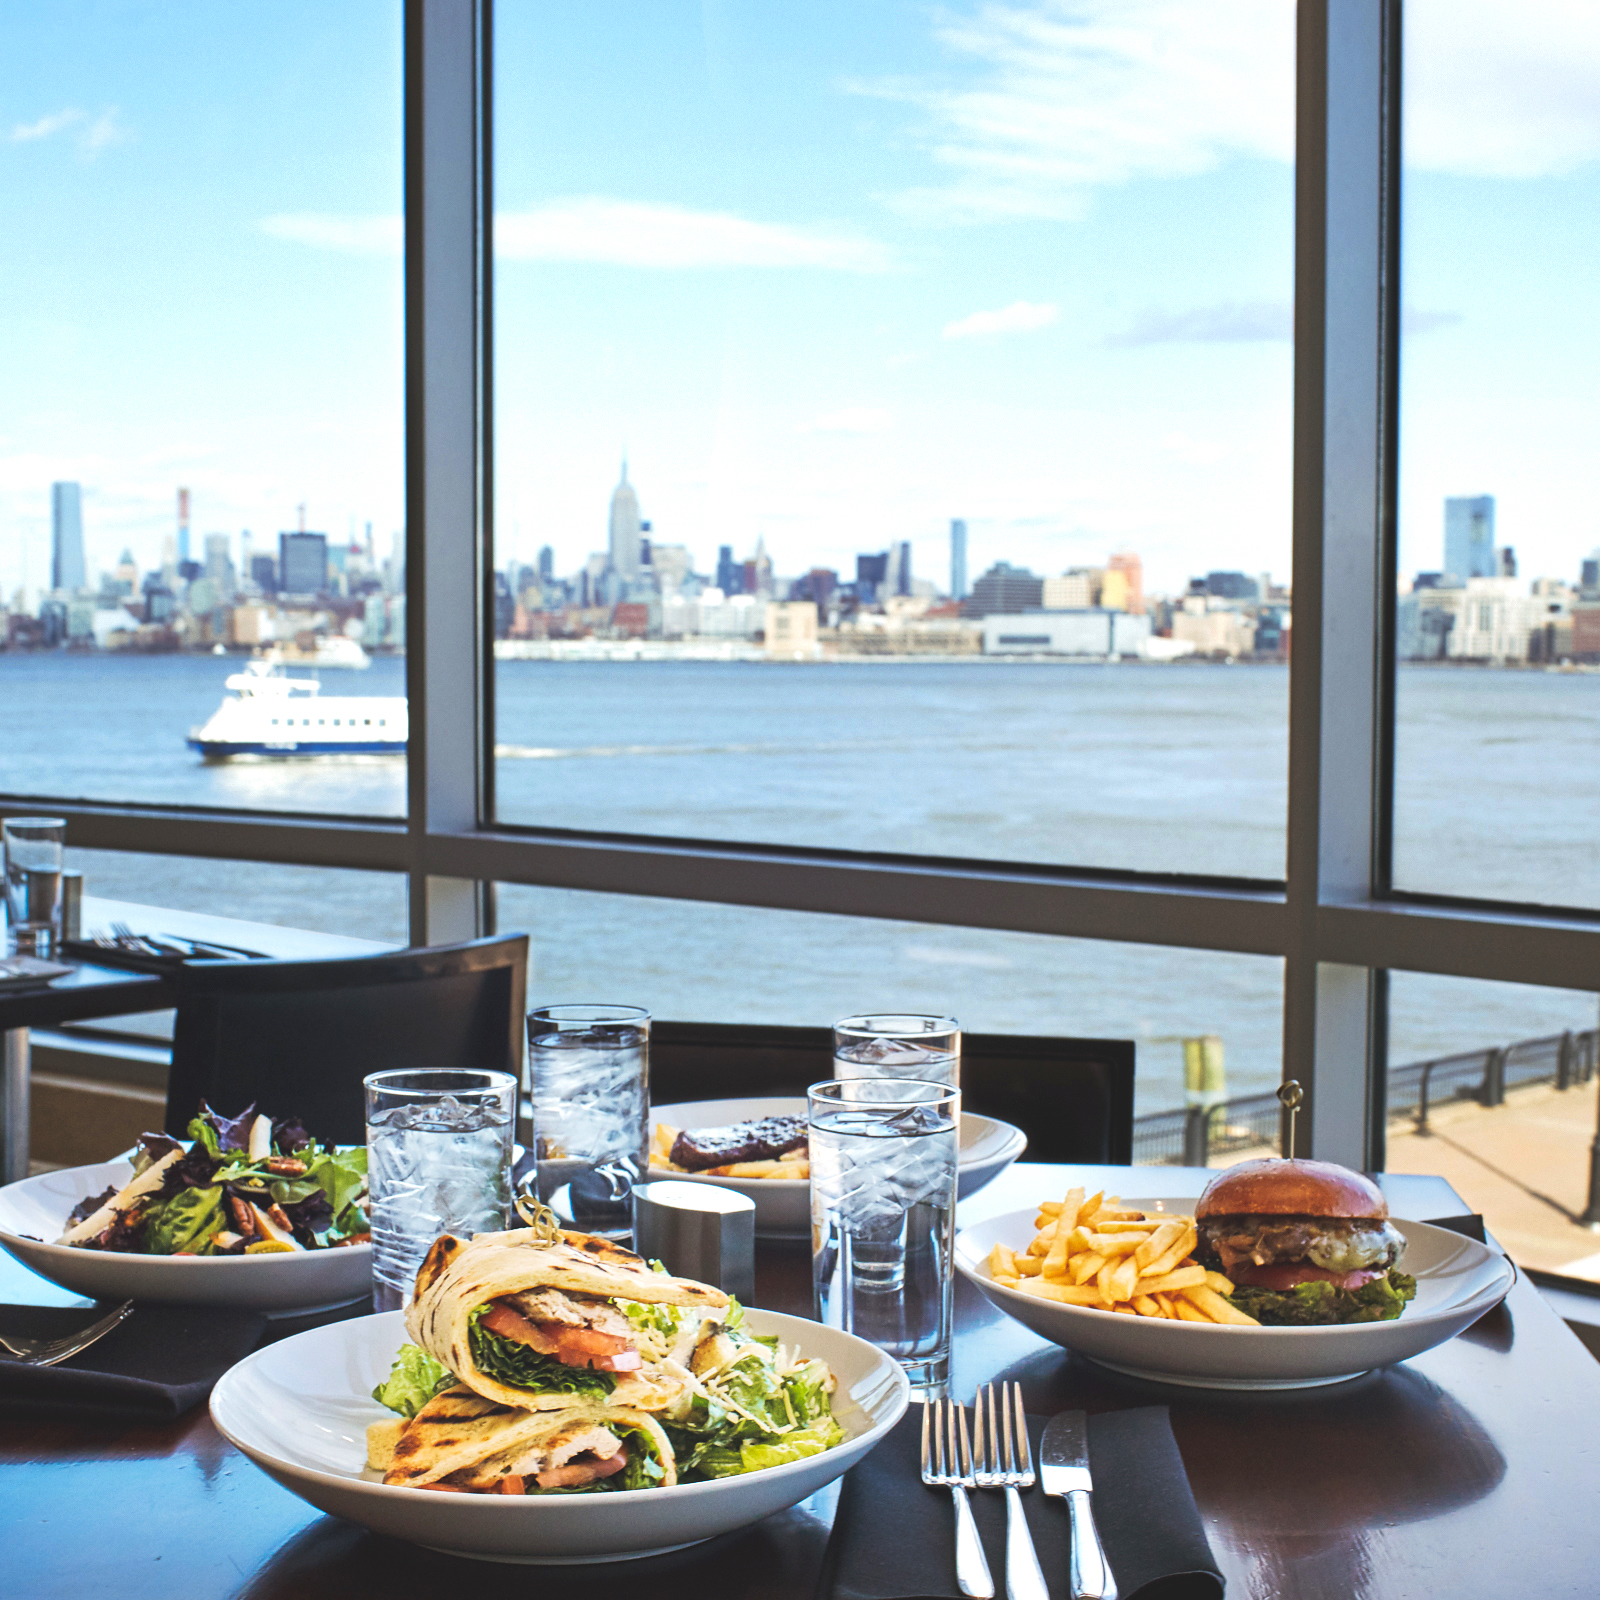 A large window shows the Hudson River and a ferry boat drives by. Inside the table is set with plates that showcase a variety of lovely lunches.